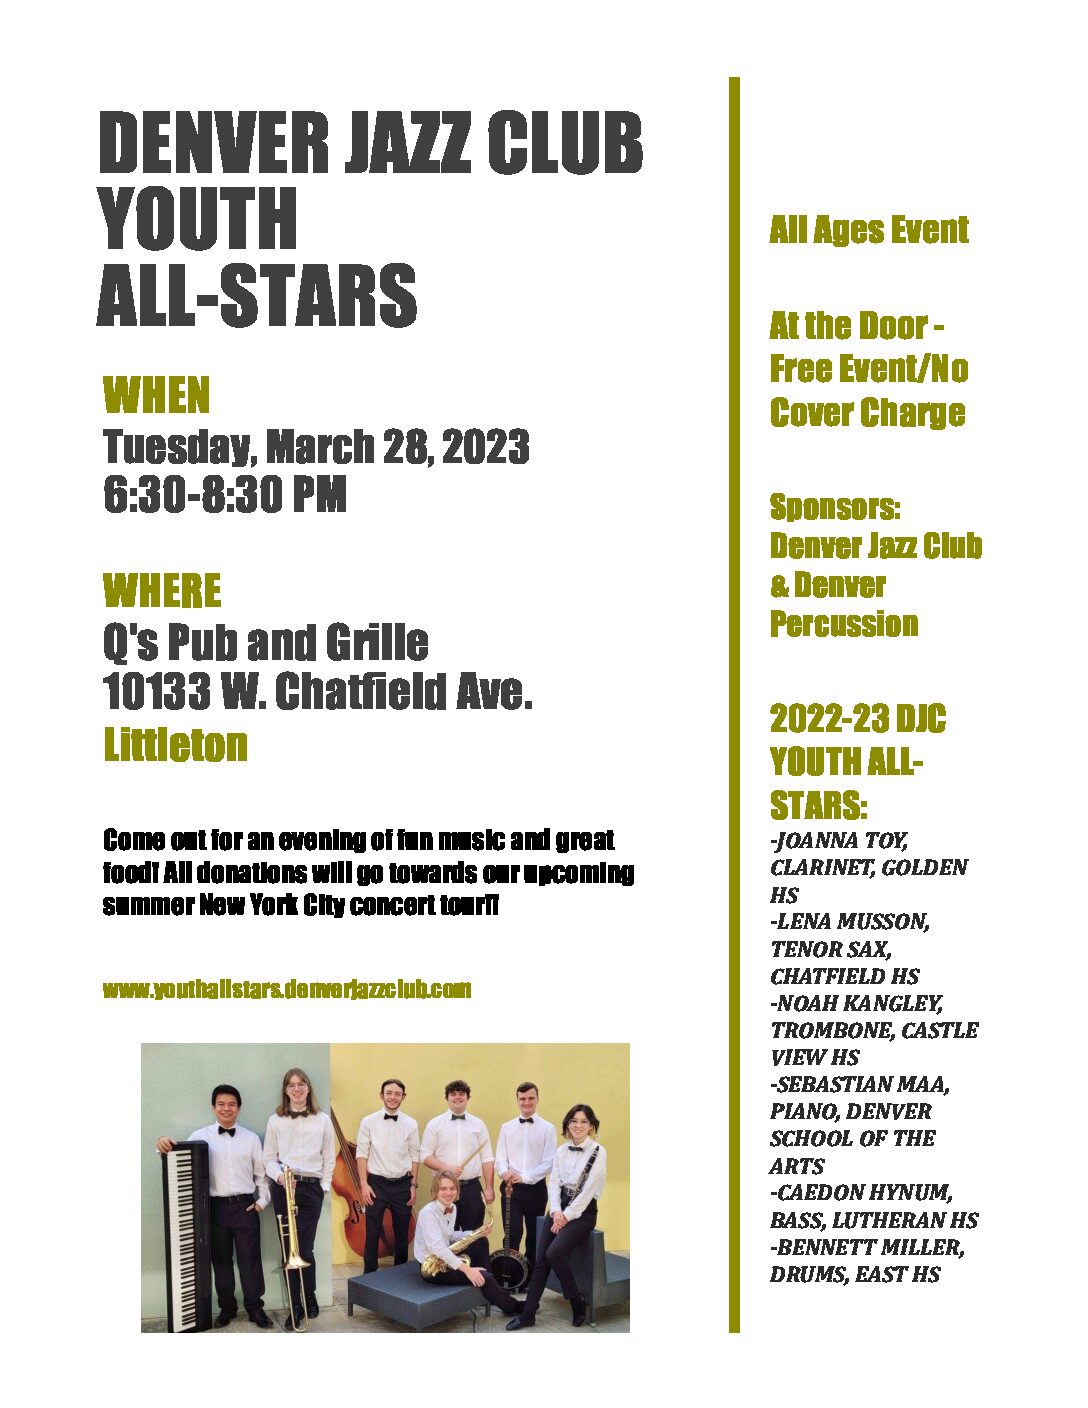 Denver Jazz Club Youth All-Stars to Perform at Q’s Pub and Grille on Tuesday, March 28th (6:30-8:30pm)